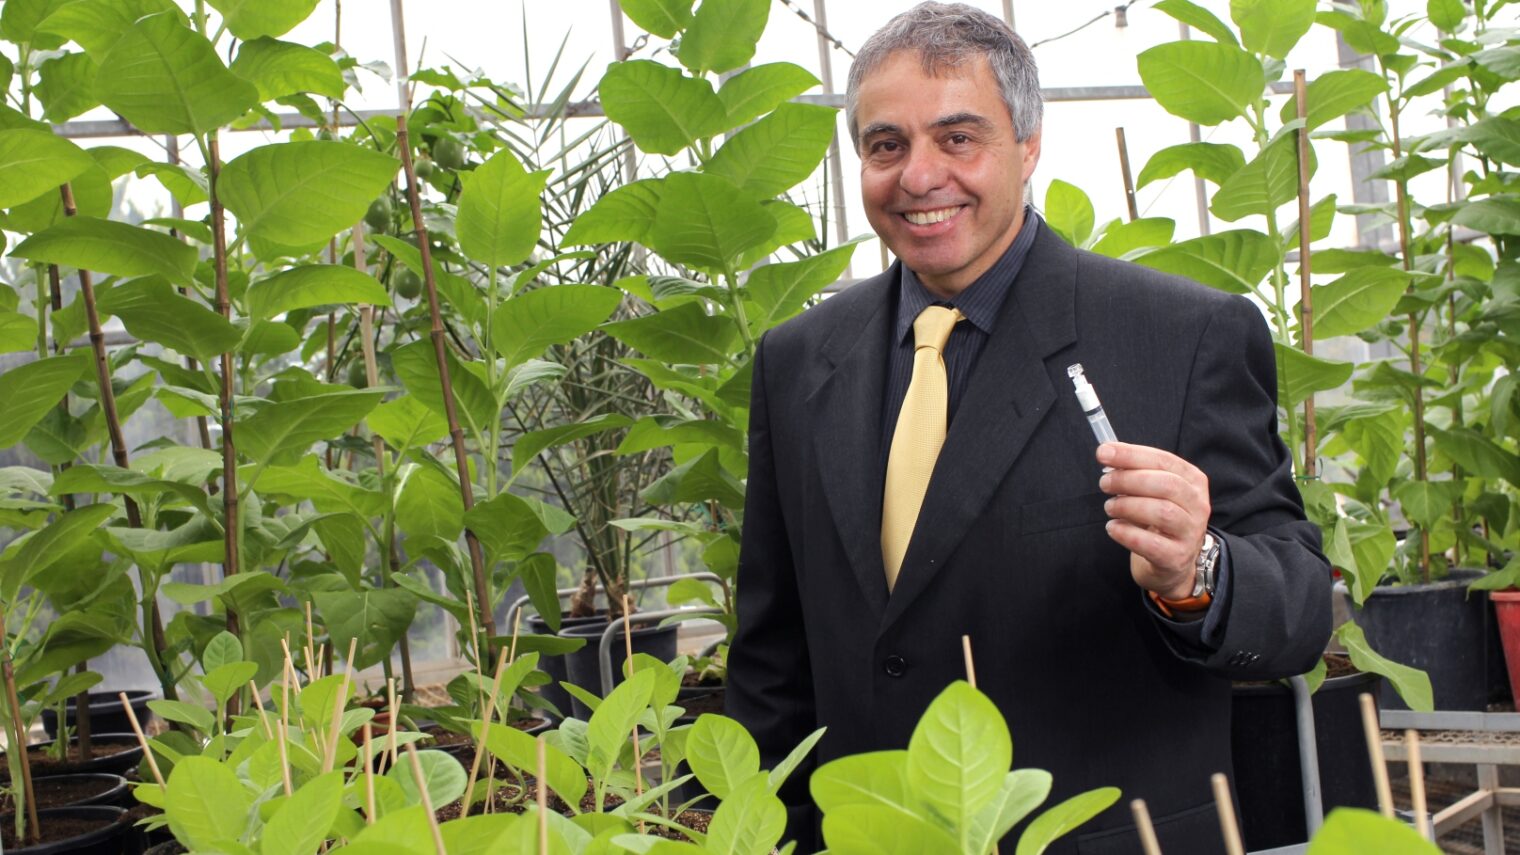 Prof. Oded Shoseyov with his transgenic tobacco plants. Photo by Nati Shohat/FLASH90